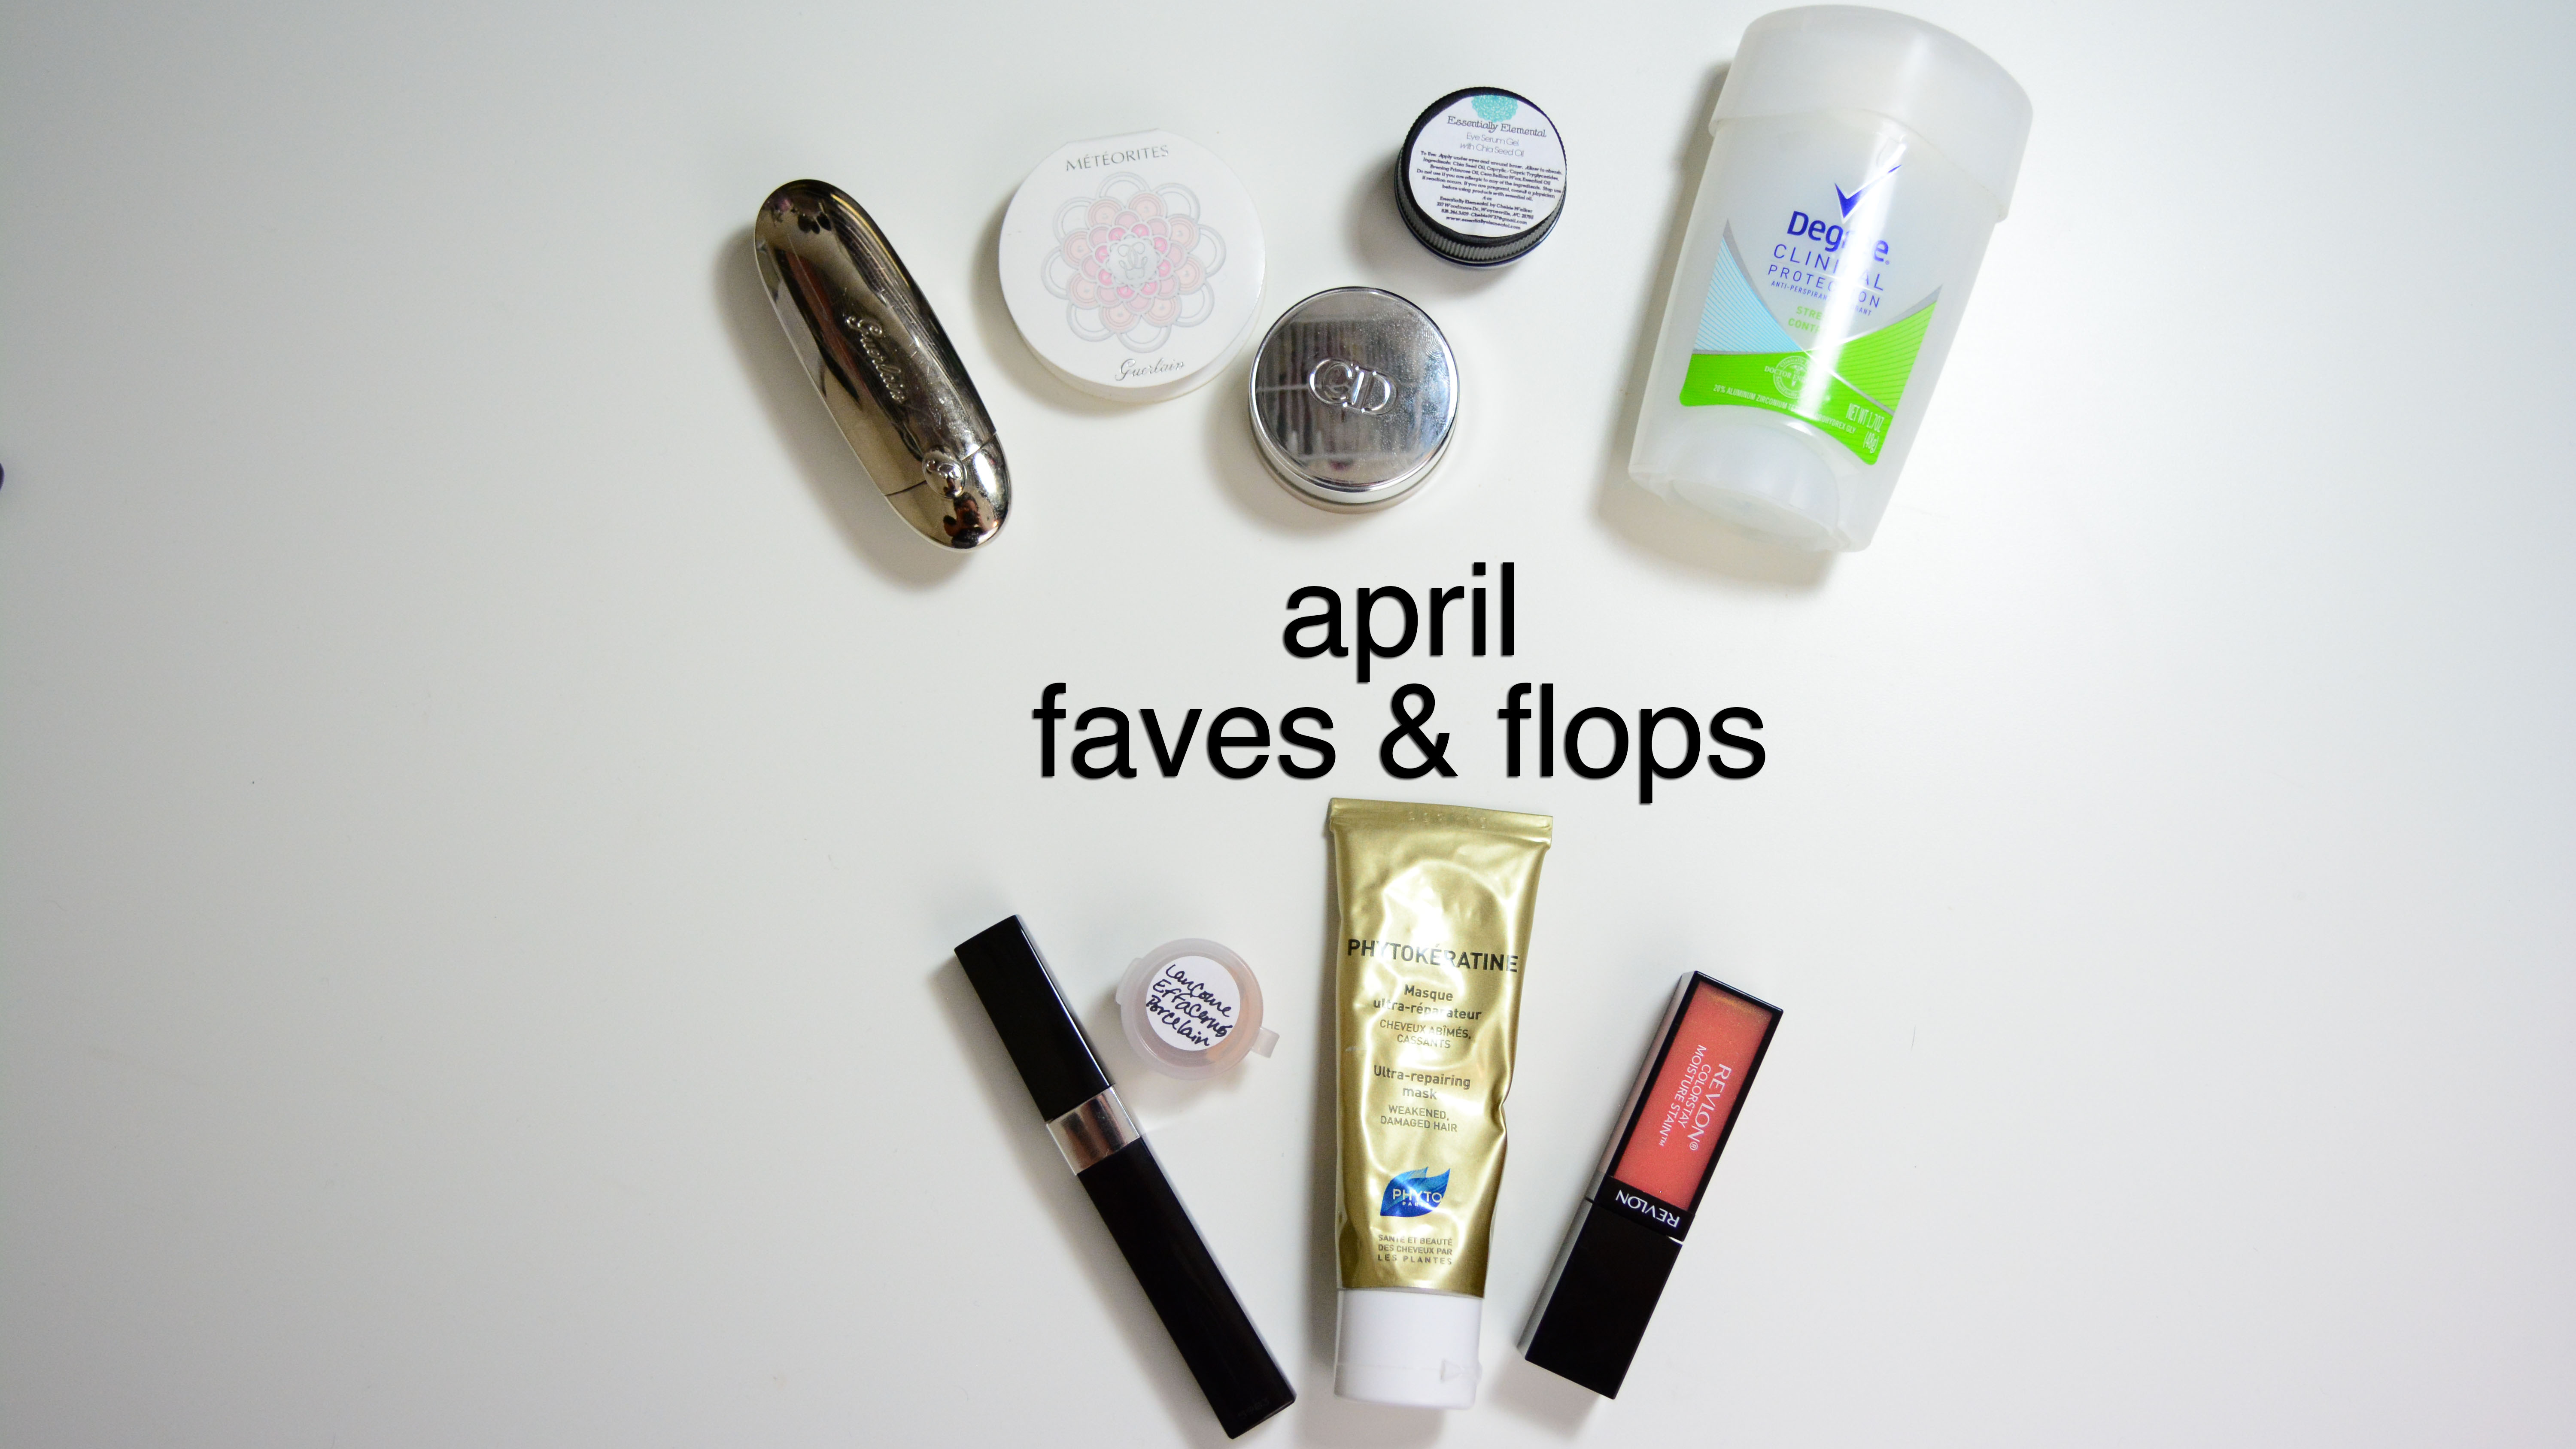 April faves (and flops)